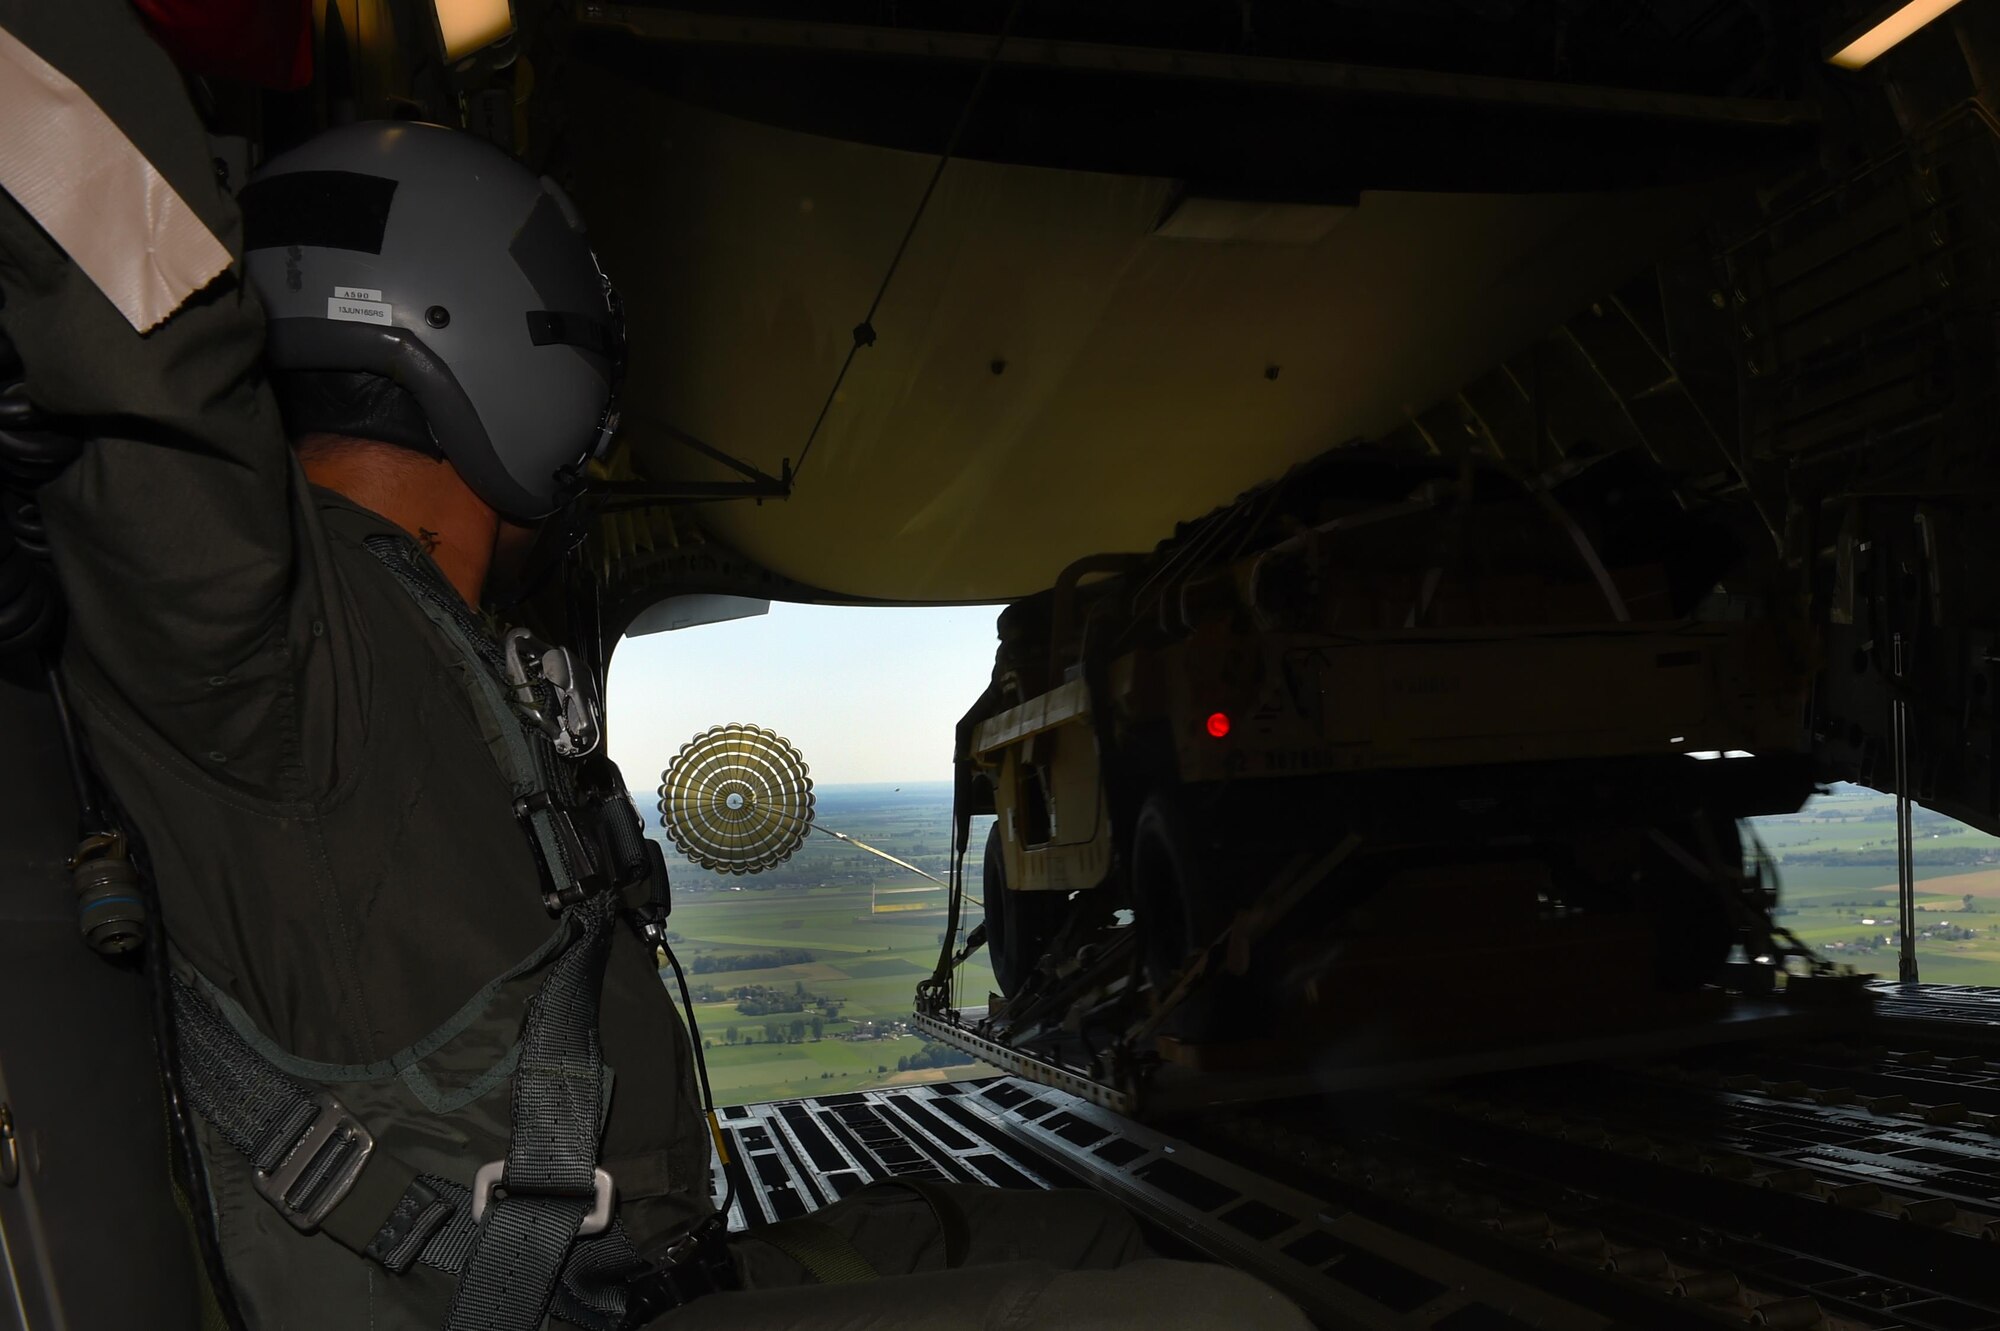 An Army Humvee is dropped into Poland on June 6, 2016, from a 62nd Airlift Wing C-17 Globemaster III. The Humvee was used by 82nd Airborne Division paratroopers to conduct tactical training on the ground during Exercise Swift Response 2016. (Air Force photo/Staff Sgt. Naomi Shipley)